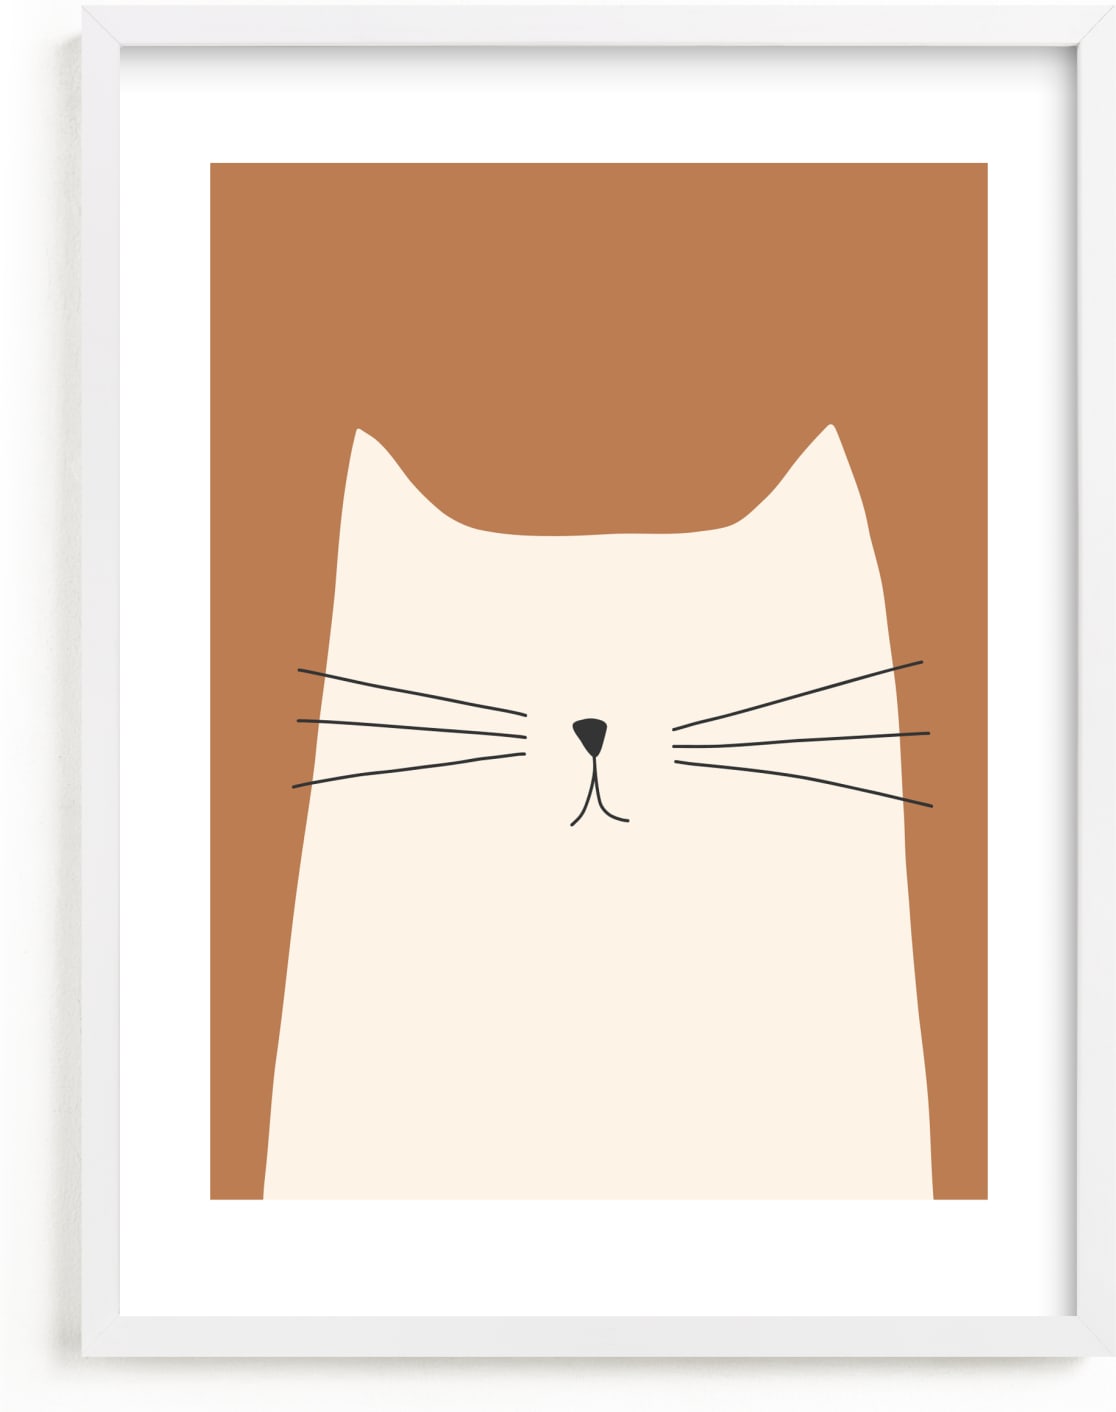 This is a brown nursery wall art by Coit Creative called House Cat.